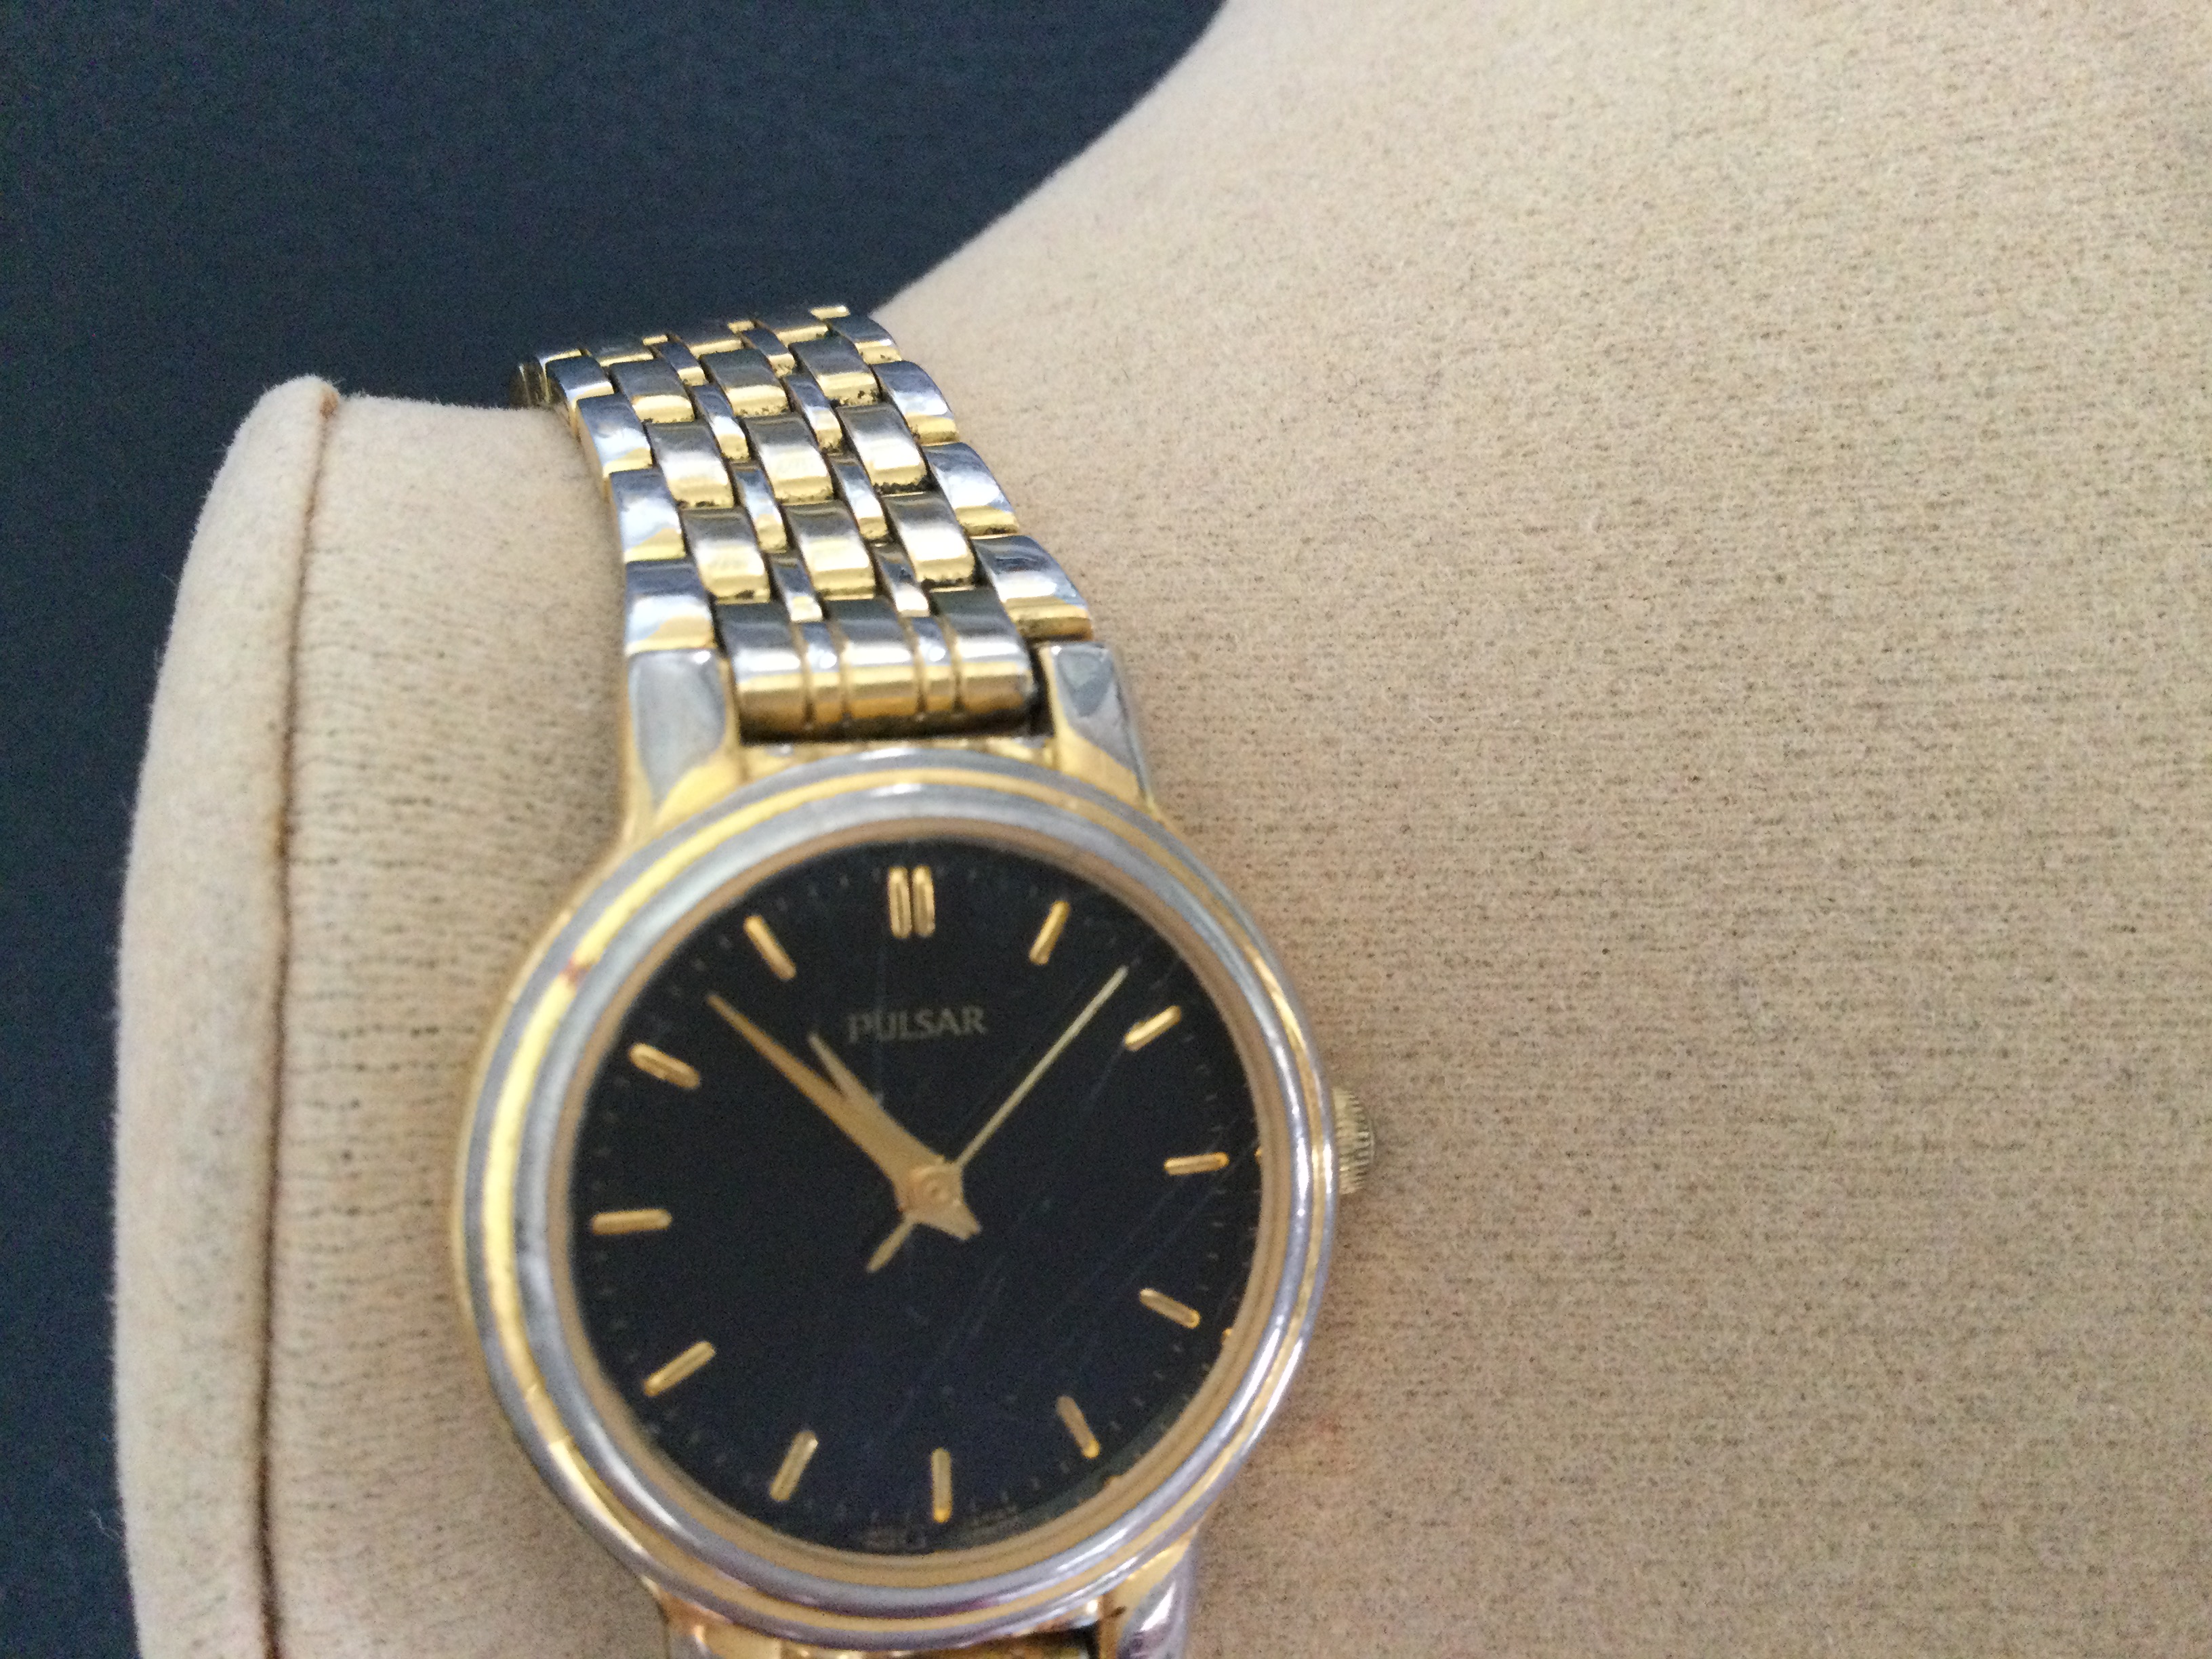 Lovely Pulsar Gold Plated Ladies Wristwatch (GS 44) - Image 3 of 6